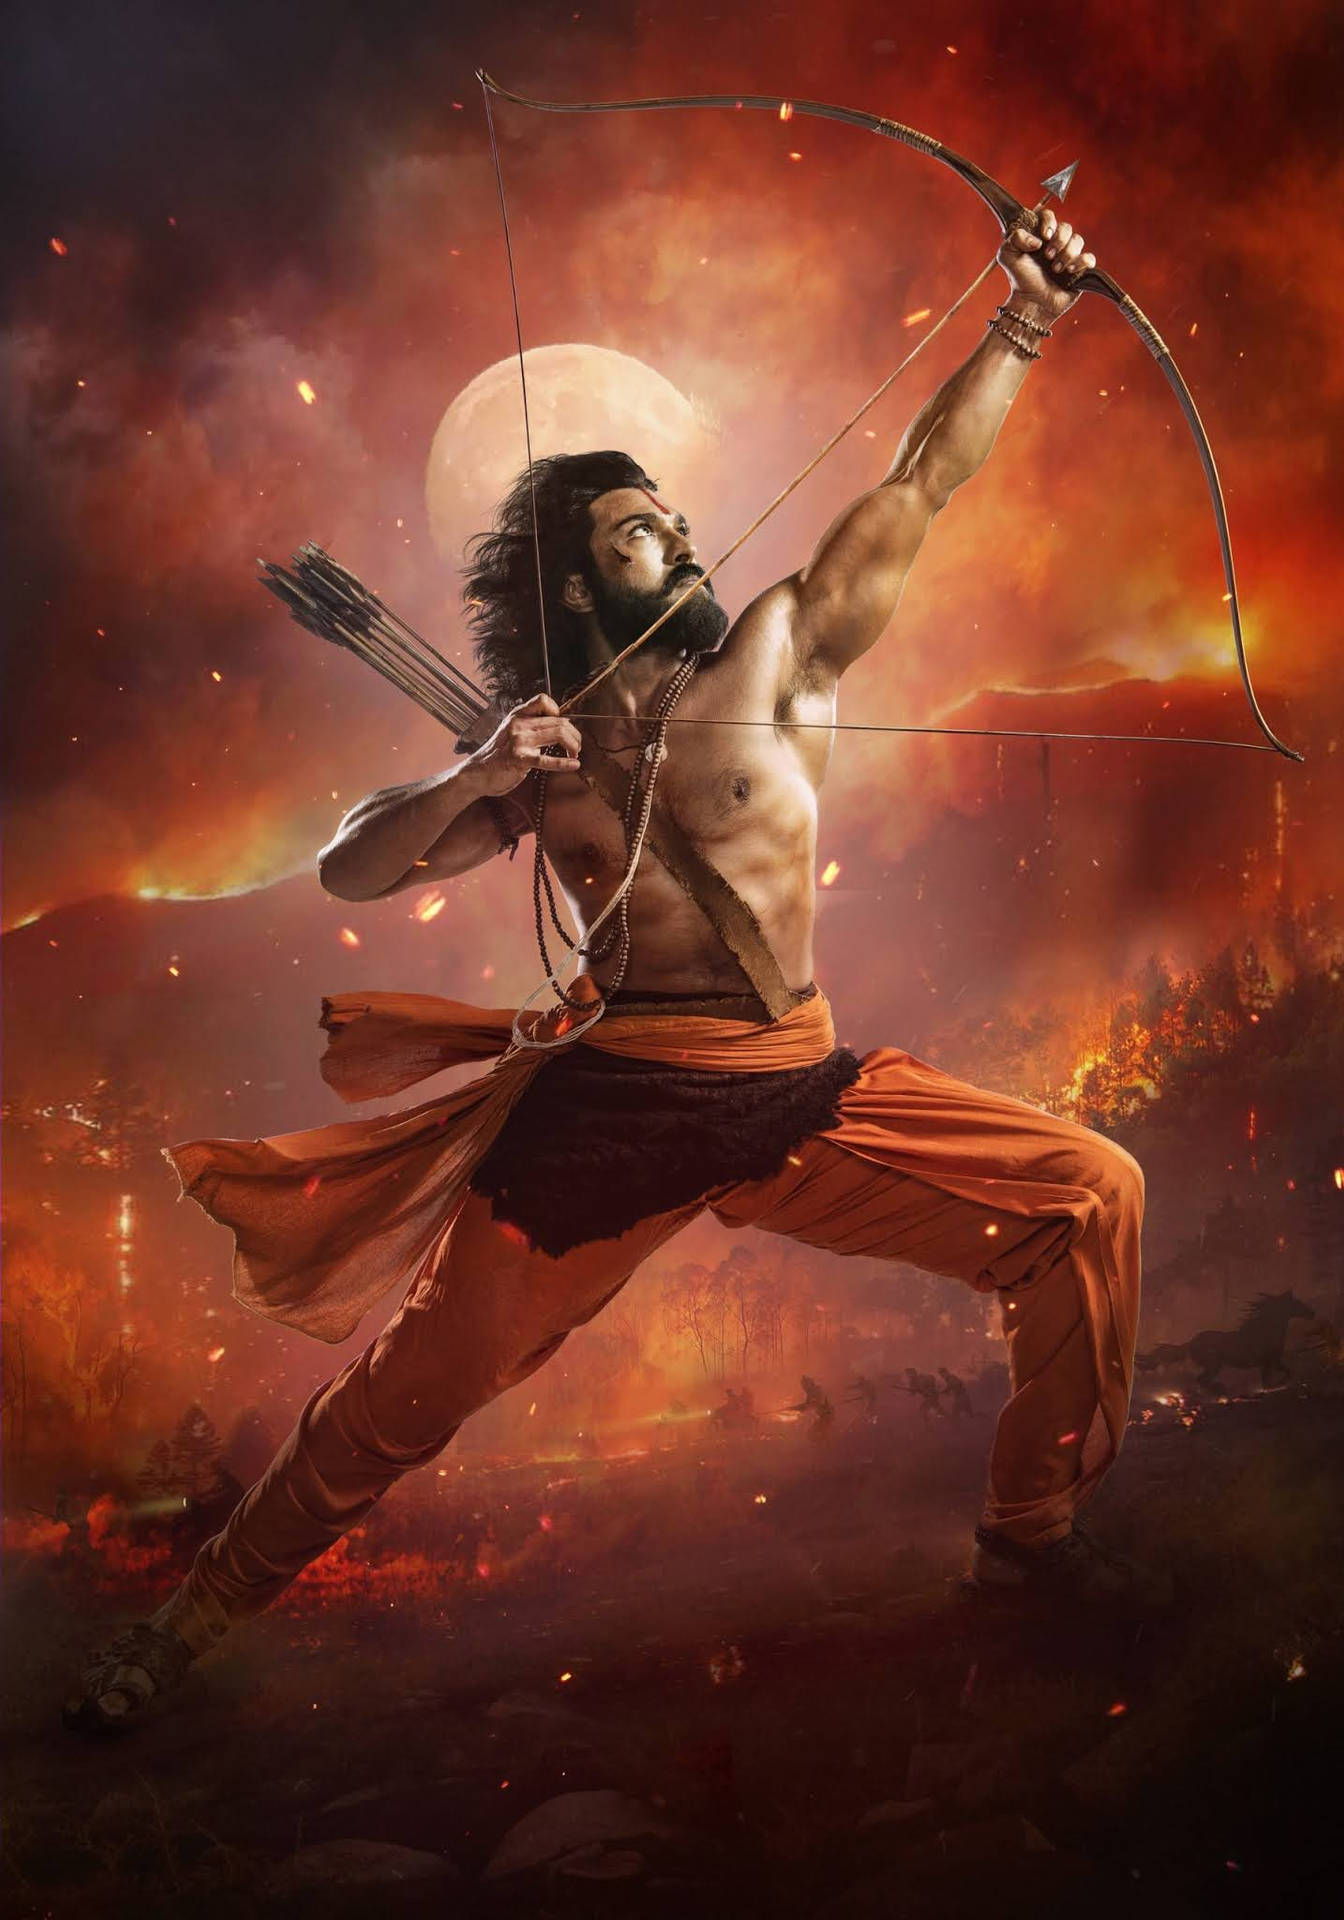 Download Ram Charan With Bow And Arrow Wallpaper 